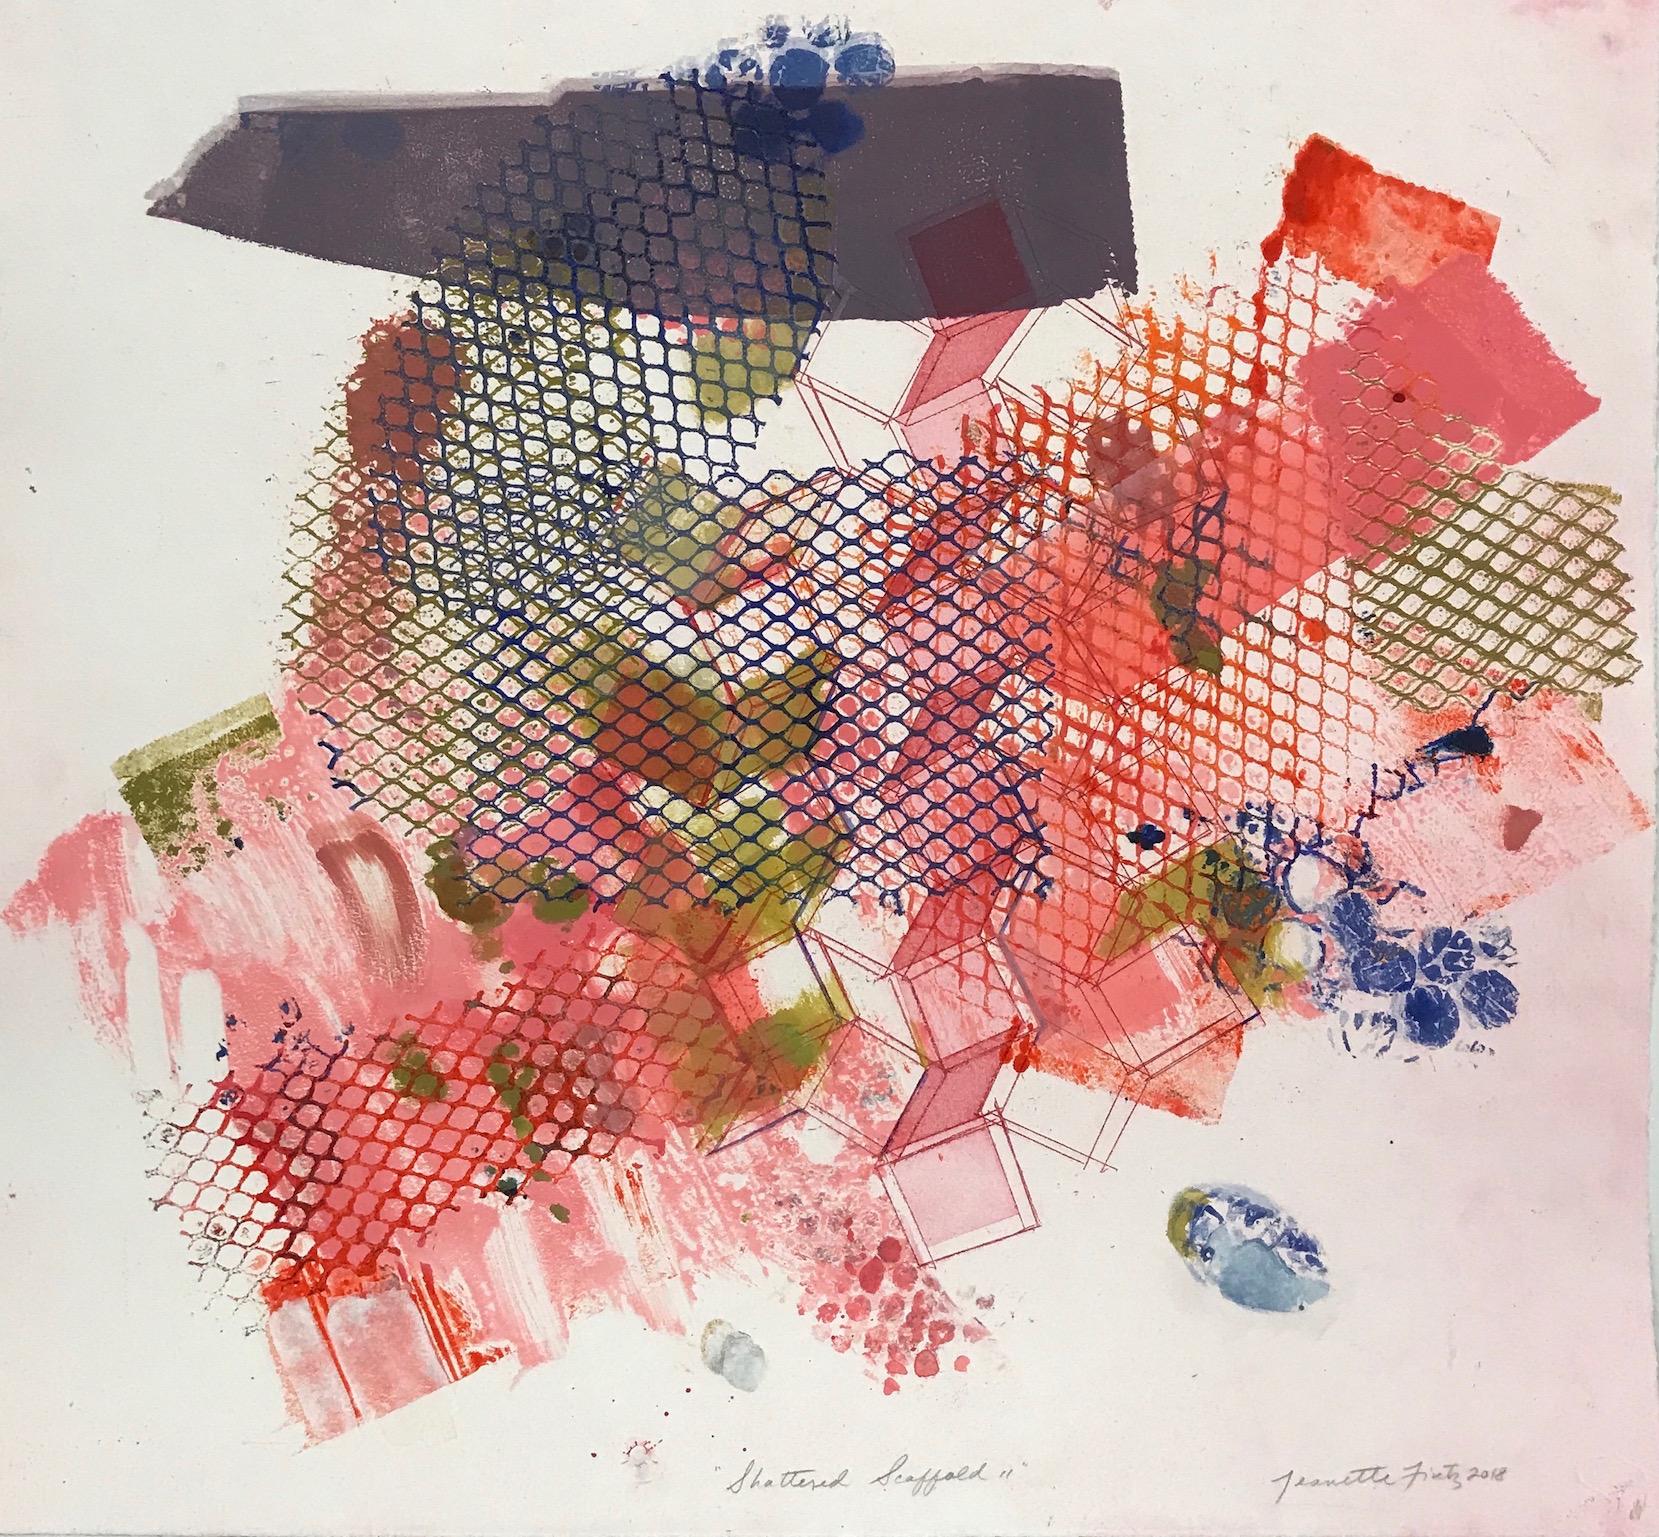 Jeanette Fintz Abstract Print - "Shattered Scaffold 11", gestural abstract etched monoprint, red, blue, pink.